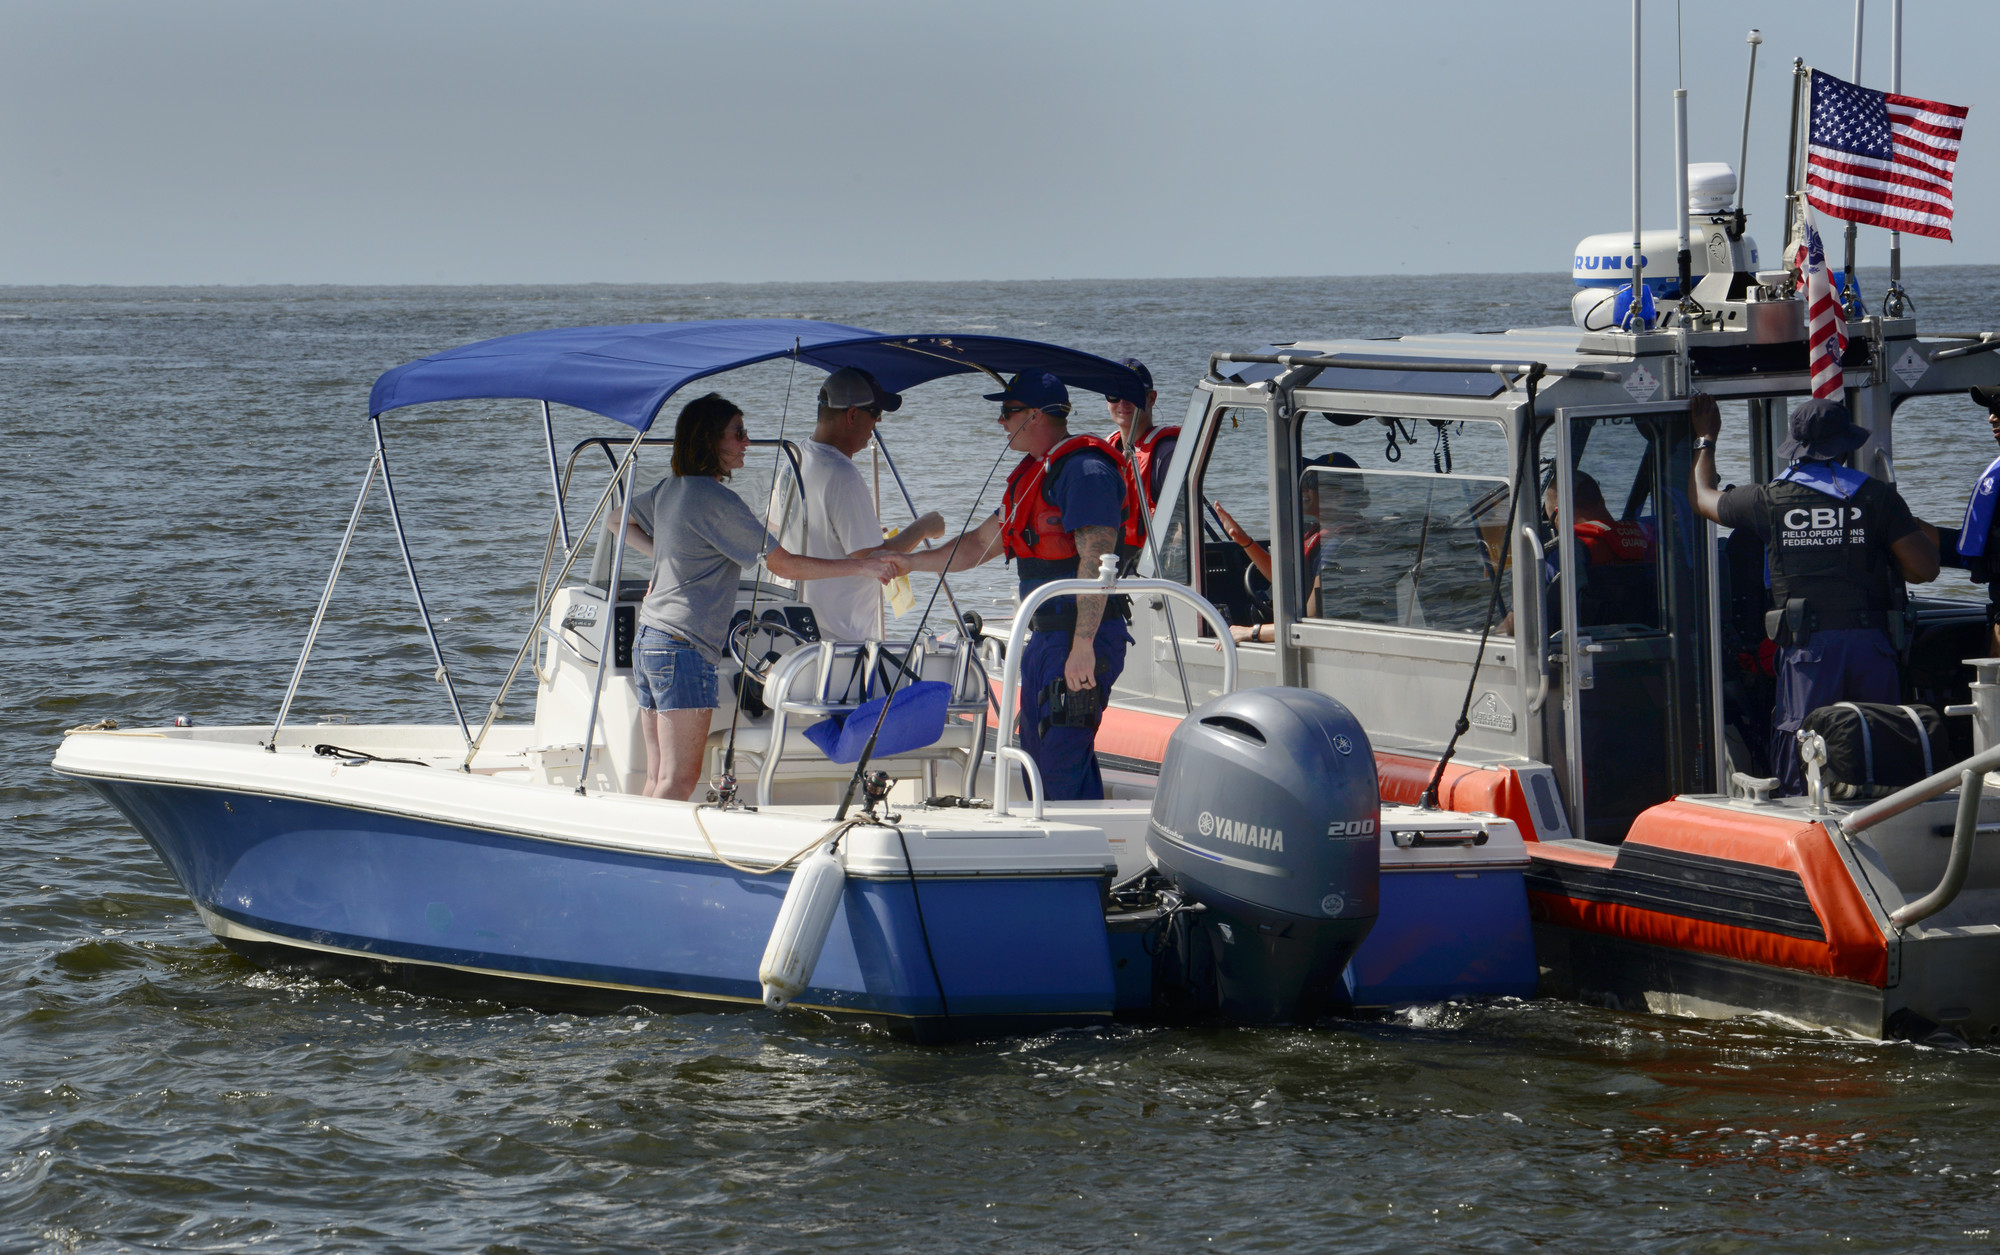 A U.S. Coast Guard response boat stops a recreational boater in the Charleston Harbor, S.C. Aug. 11, 2018, as part of Operation SHRIMP and GRITS, a multi-state and multi-jurisdiction maritime enforcement operation. The name stands for “Save Harbor Reach on Intelligence for Multi-state Partnerships and Guarding Responsible Interests for Target Safety.” The operation targets recreational and commercial vessels transitioning north and south along the Intracoastal Waterway and offshore. (U.S. Air Force photo by Senior Airman Tenley Long)